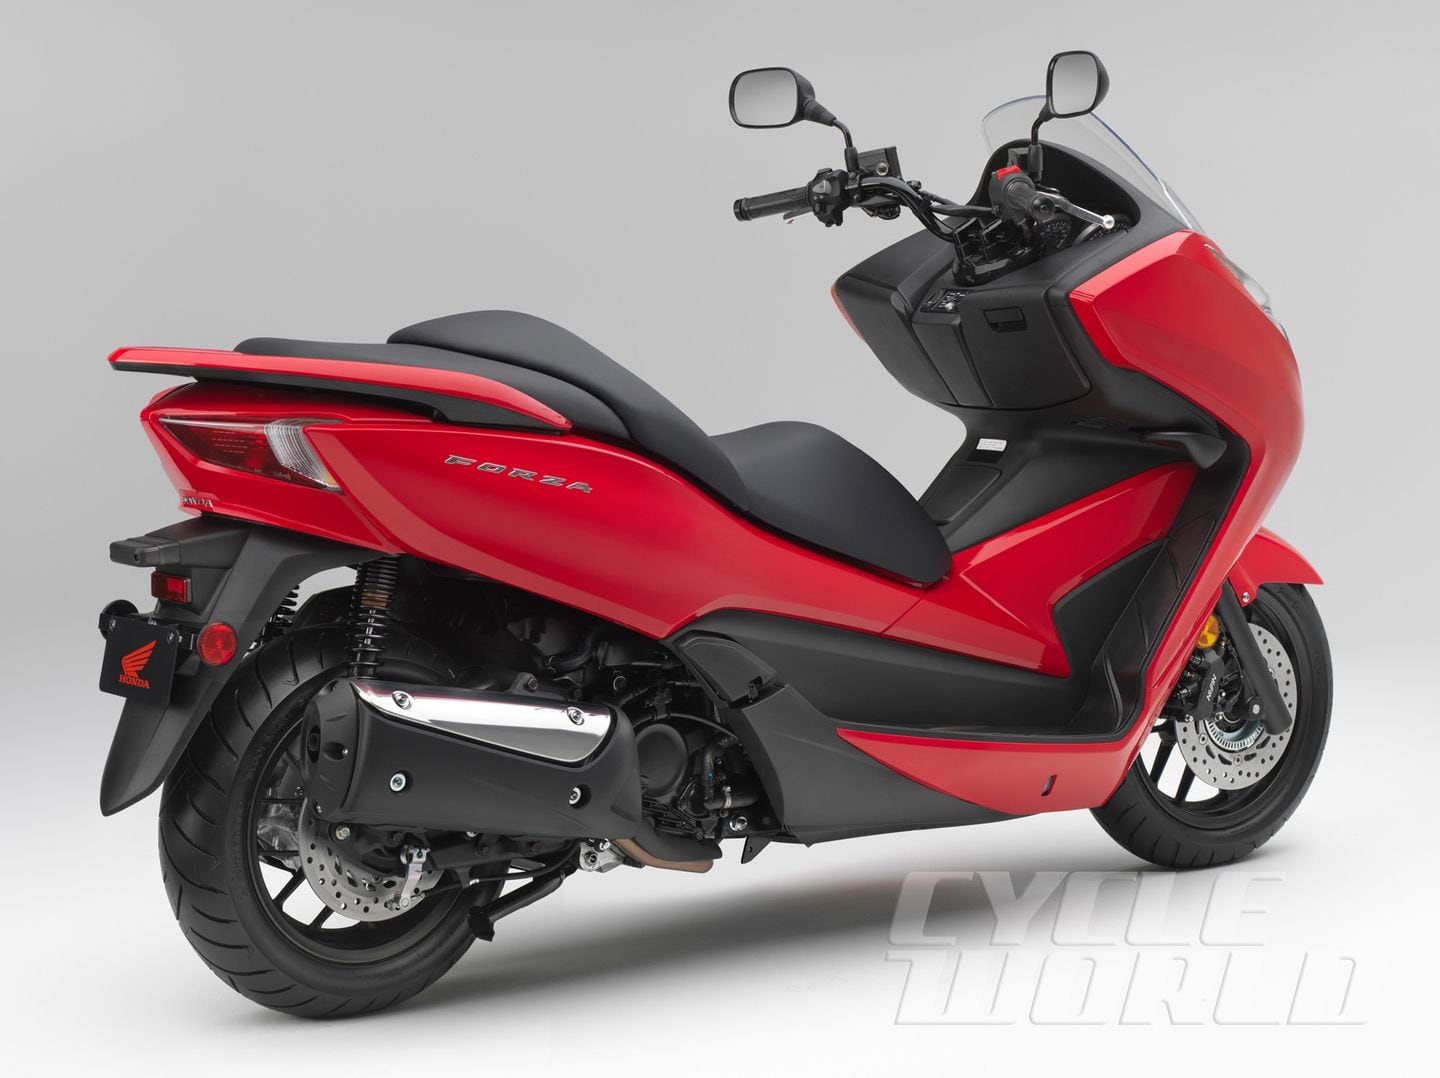 Honda Forza 350 Estimated Price, Launch Date 2023, Images, Specs